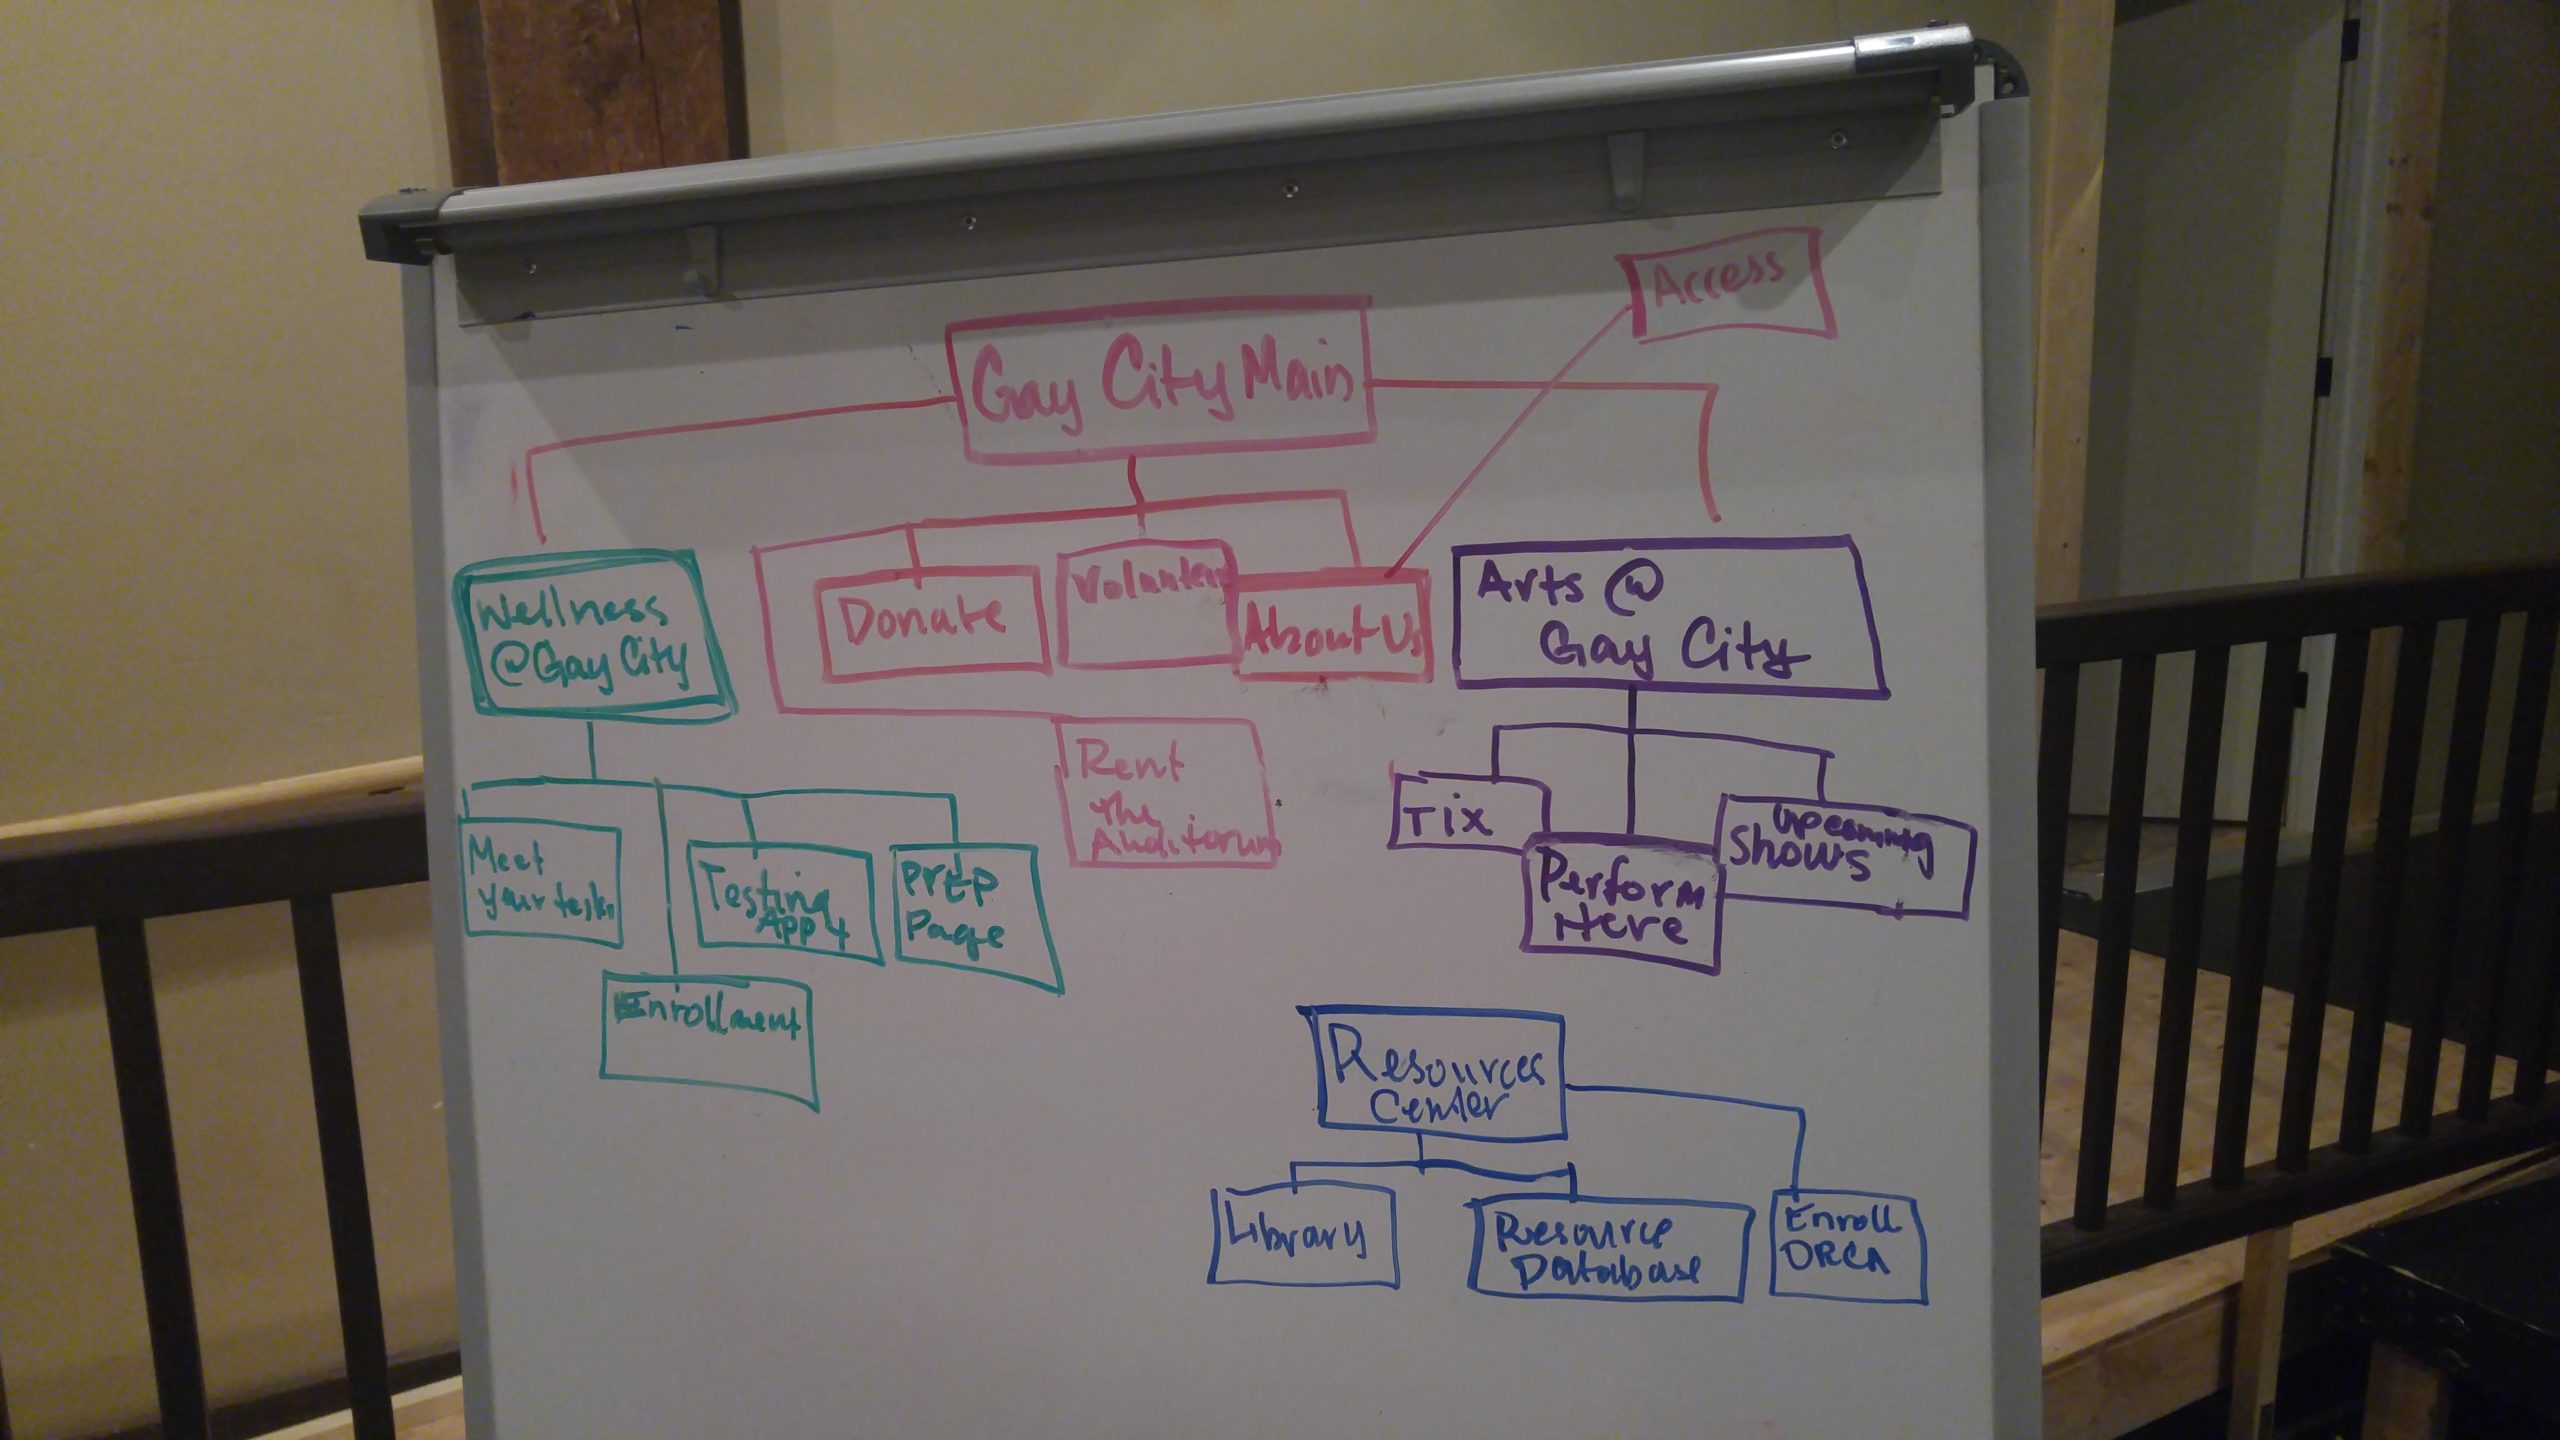 Picture of Preliminary Gay City Sitemap on a whiteboard.